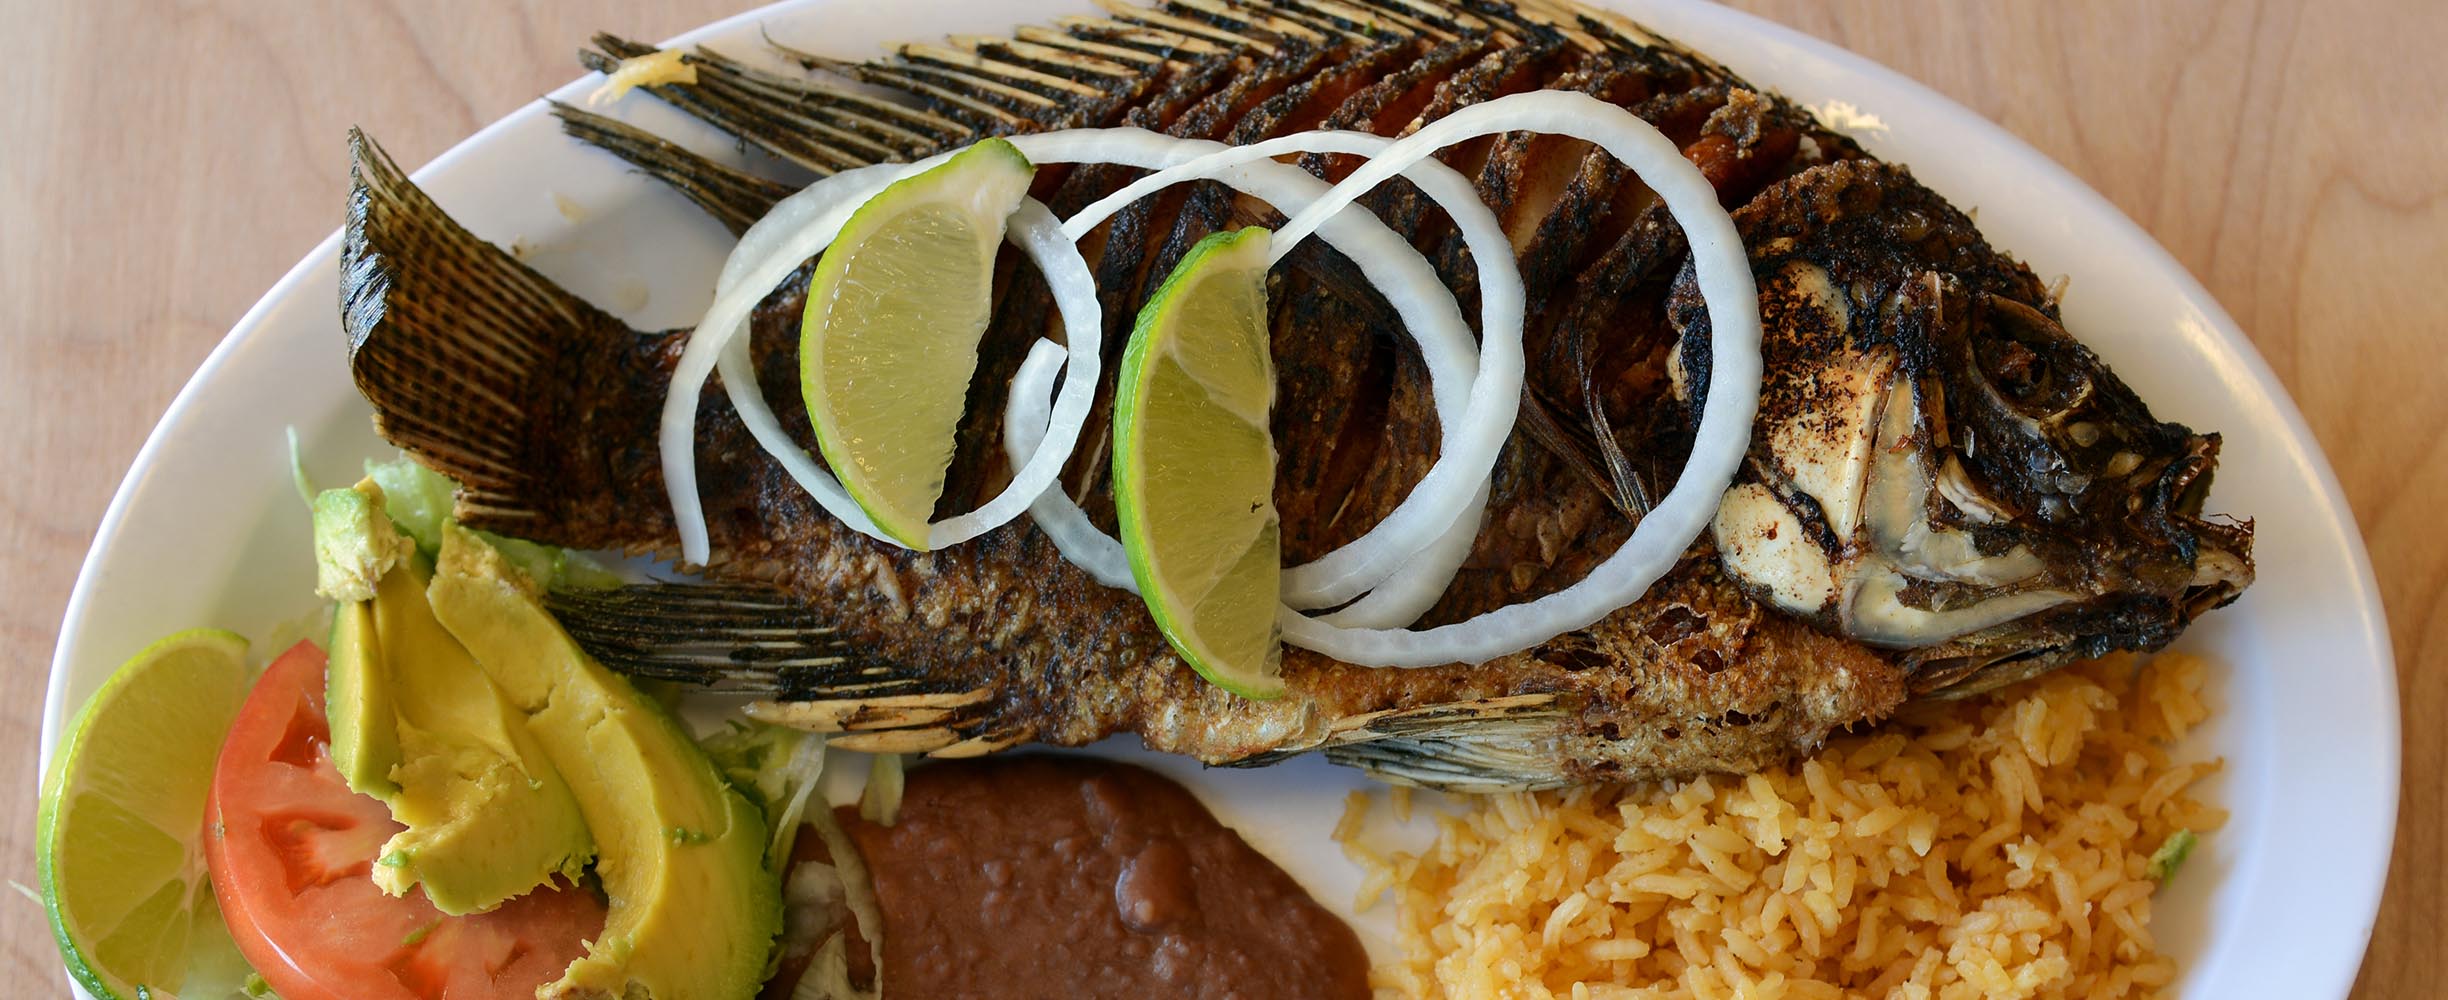 Whole Fried Fish is a Salvadoran dish served in Rincon Sabroso, prepared by Central American cooks